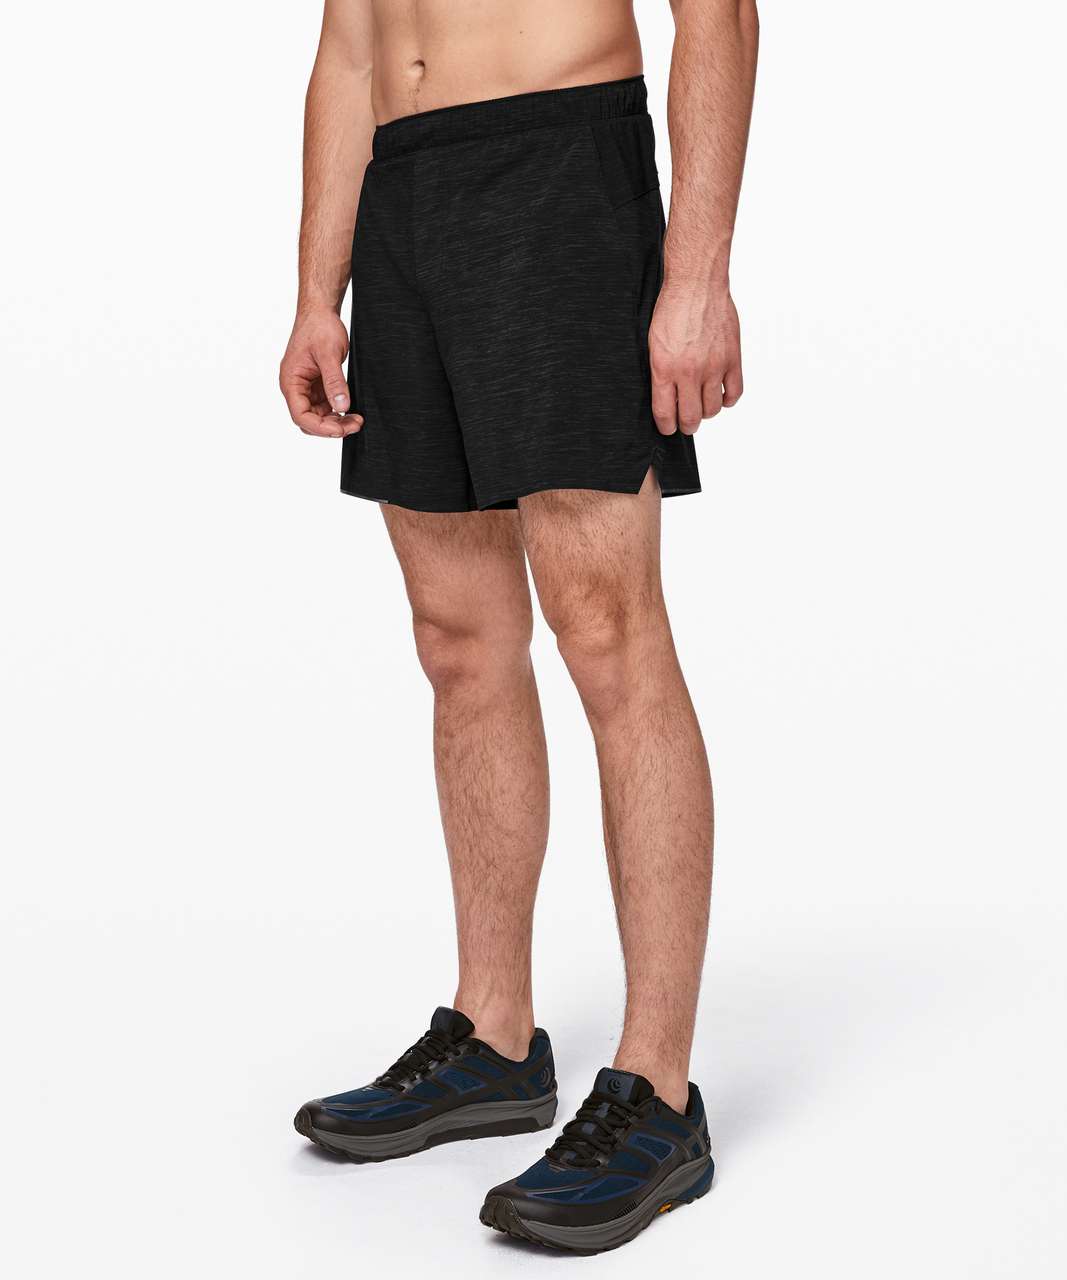 Lululemon Surge Shorts 6” linerless running shorts - clothing & accessories  - by owner - craigslist